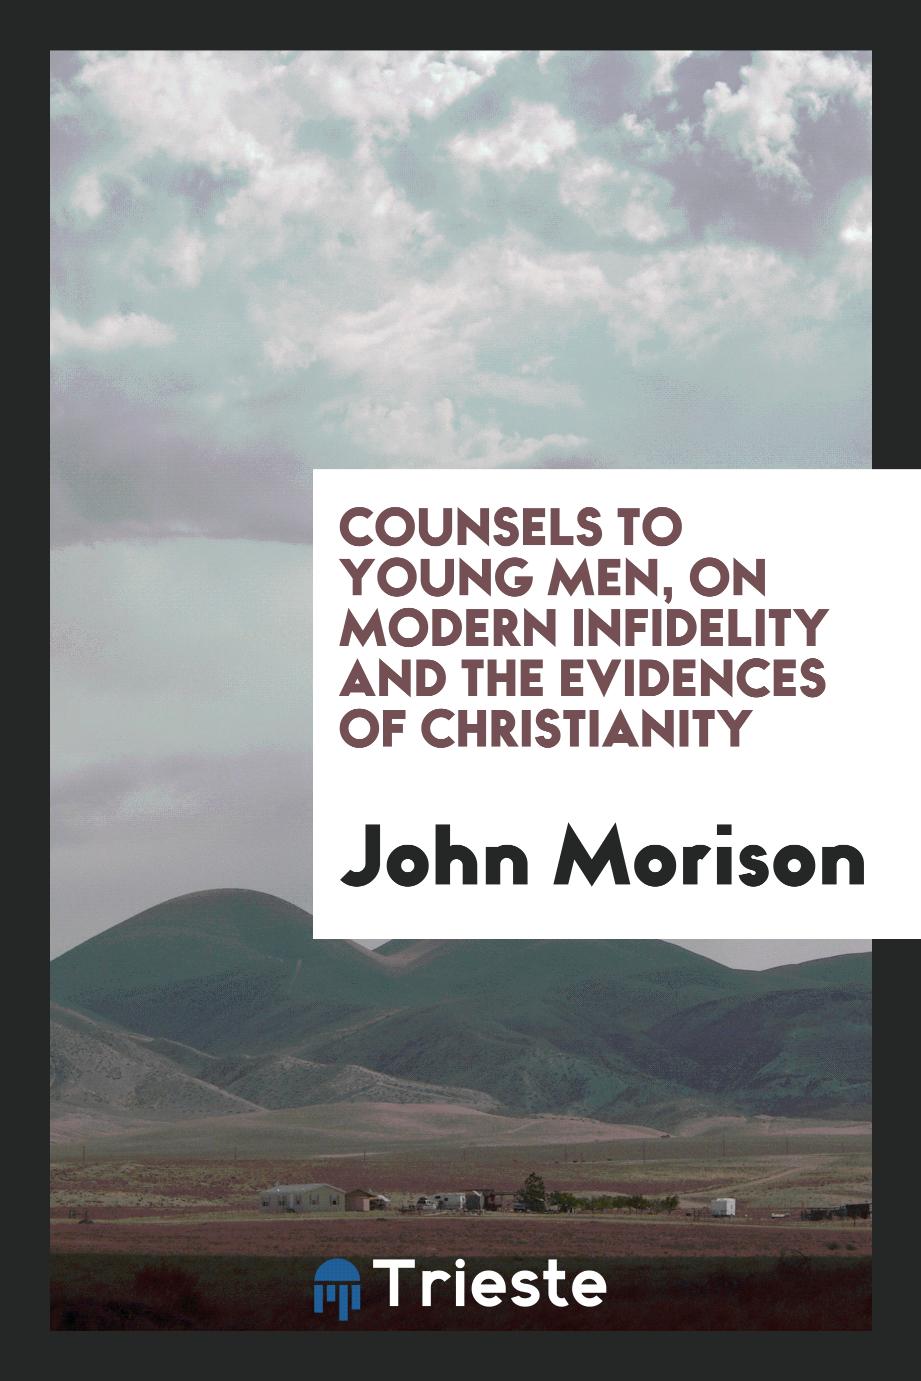 John Morison - Counsels to young men, on modern infidelity and the evidences of Christianity